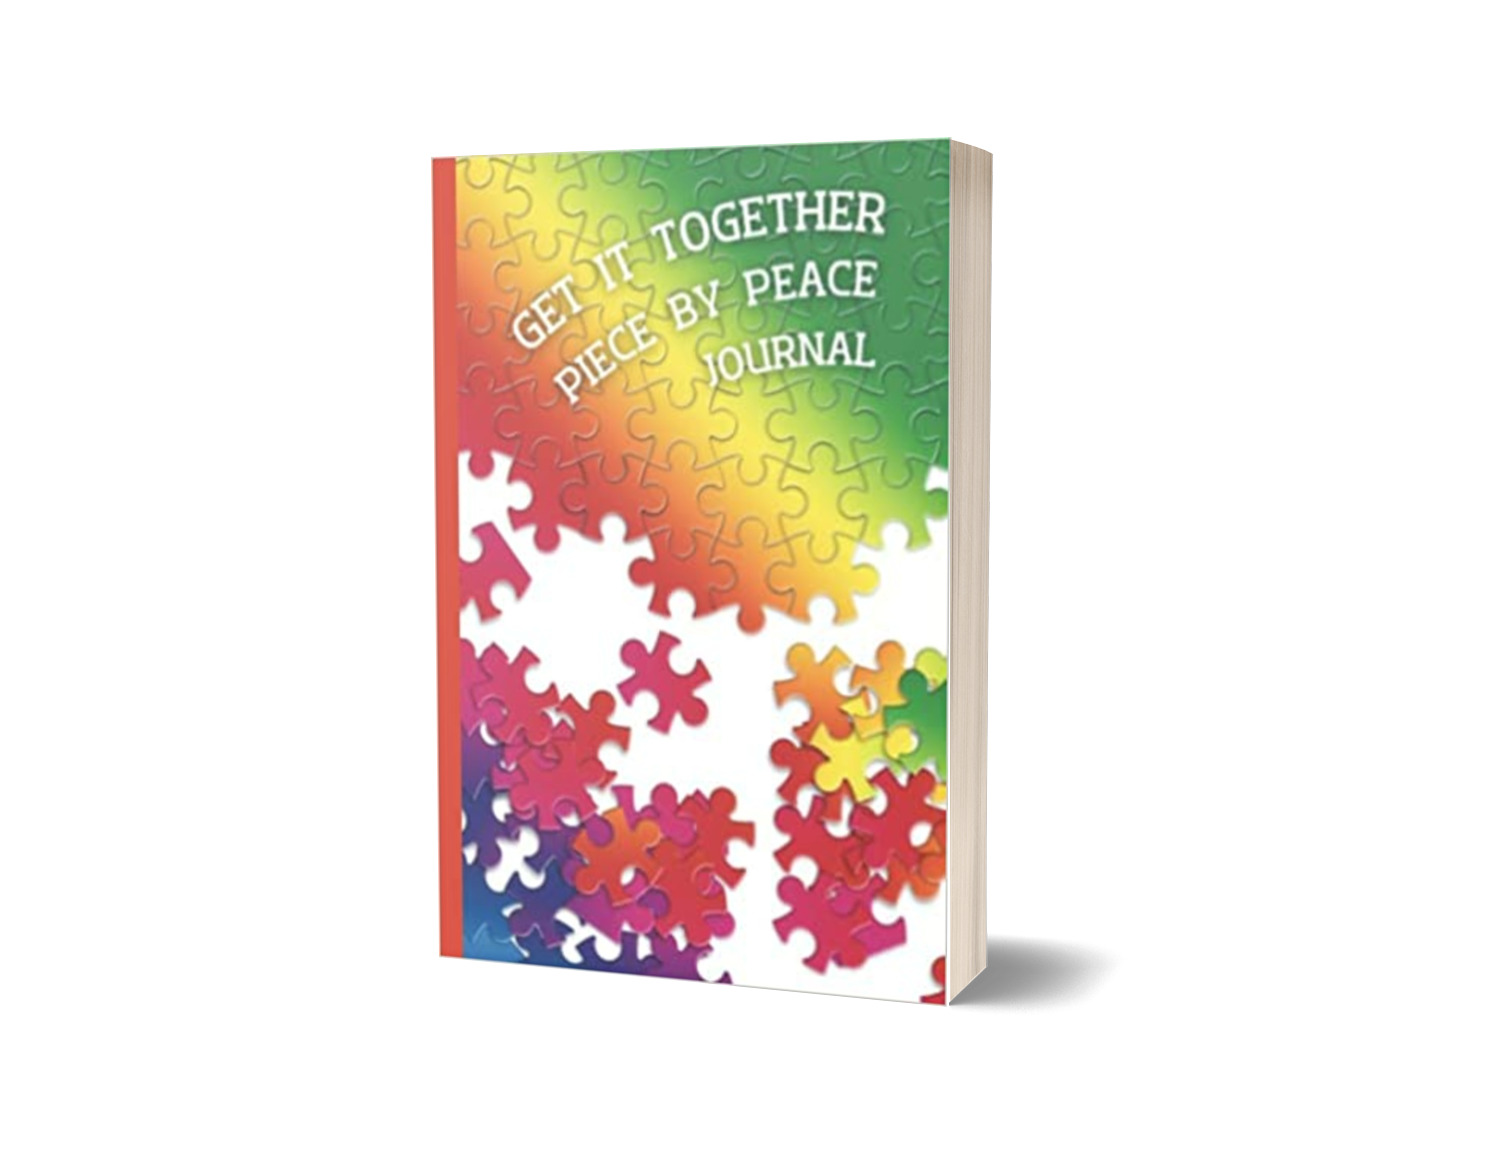 Jigsaw Puzzle Journal can be used in conjunction with the benefits of doing jigsaw puzzles. You can use it for mental wellness journalling and/or for taking notes about your jigsaw puzzle hobby.